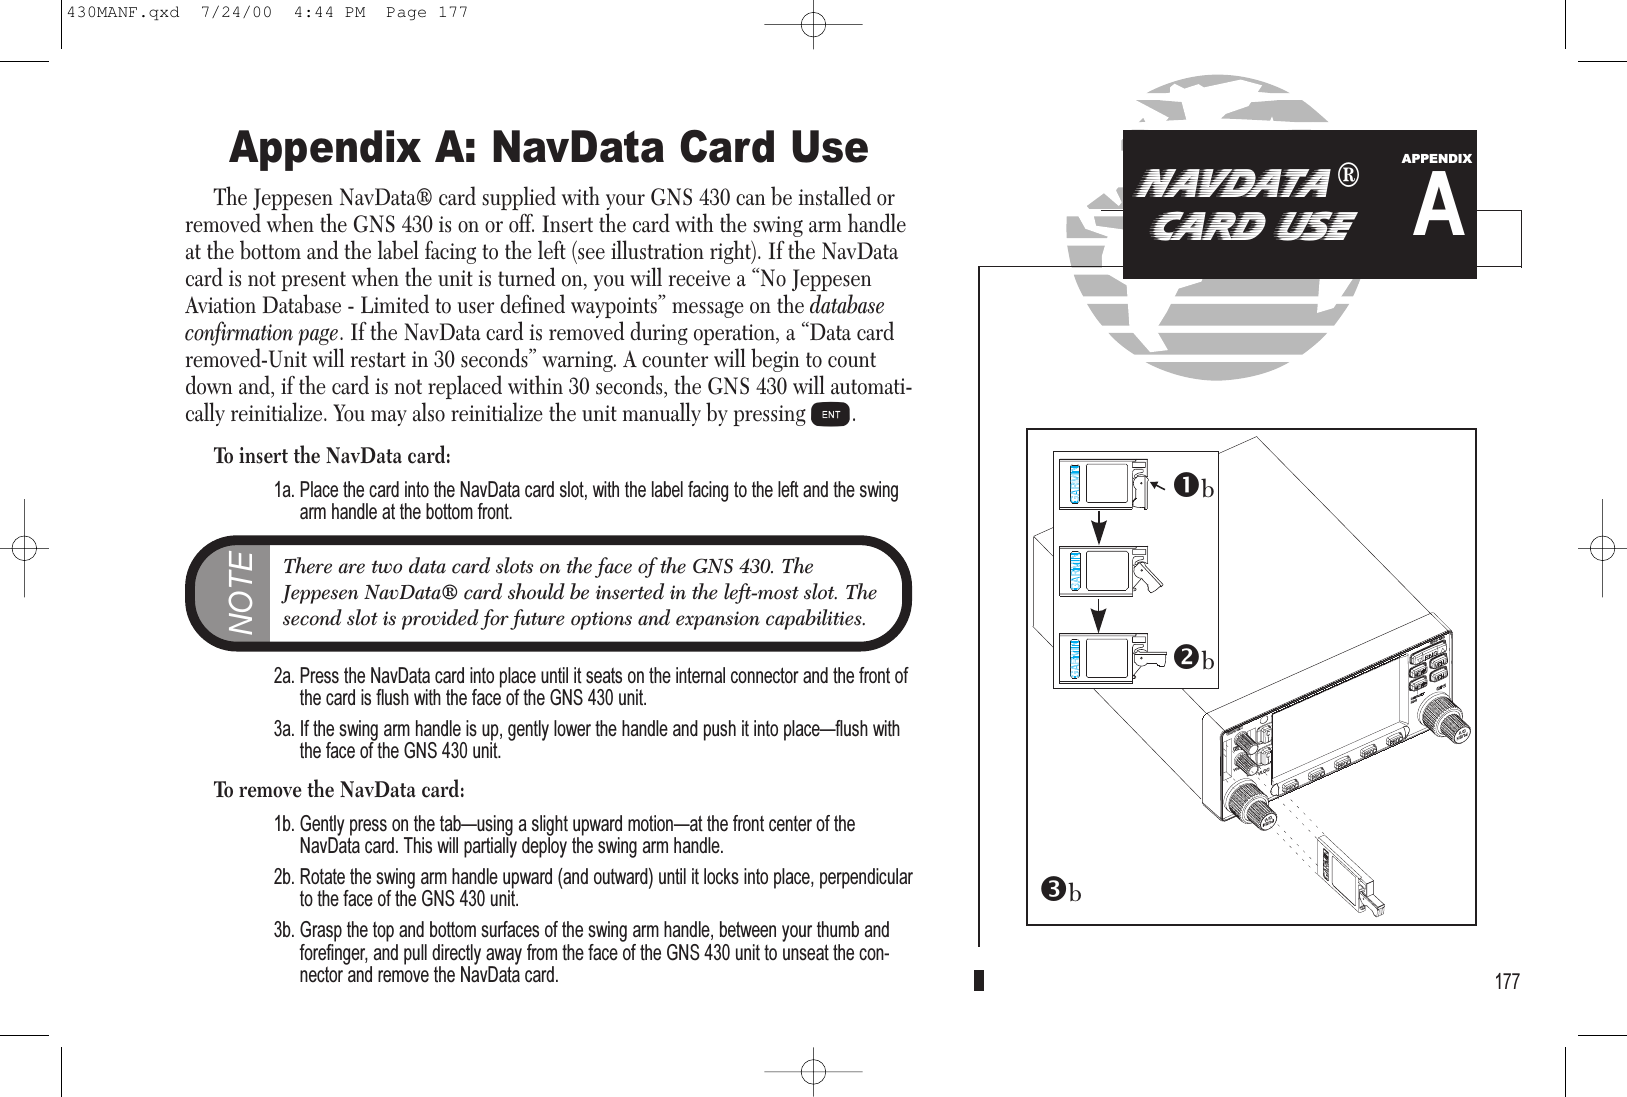 Appendix A: NavData Card UseThe Jeppesen NavData® card supplied with your GNS 430 can be installed orremoved when the GNS 430 is on or off. Insert the card with the swing arm handleat the bottom and the label facing to the left (see illustration right). If the NavDatacard is not present when the unit is turned on, you will receive a “No JeppesenAviation Database - Limited to user defined waypoints” message on the databaseconfirmation page. If the NavData card is removed during operation, a “Data cardremoved-Unit will restart in 30 seconds” warning. A counter will begin to countdown and, if the card is not replaced within 30 seconds, the GNS 430 will automati-cally reinitialize. You may also reinitialize the unit manually by pressing E.To insert the NavData card:1a. Place the card into the NavData card slot, with the label facing to the left and the swingarm handle at the bottom front.2a. Press the NavData card into place until it seats on the internal connector and the front ofthe card is flush with the face of the GNS 430 unit.3a. If the swing arm handle is up, gently lower the handle and push it into placeflush withthe face of the GNS 430 unit.To remove the NavData card:1b. Gently press on the tabusing a slight upward motionat the front center of theNavData card. This will partially deploy the swing arm handle.2b. Rotate the swing arm handle upward (and outward) until it locks into place, perpendicularto the face of the GNS 430 unit.3b. Grasp the top and bottom surfaces of the swing arm handle, between your thumb andforefinger, and pull directly away from the face of the GNS 430 unit to unseat the con-nector and remove the NavData card. 177NAVDATA ®CARD USEANOTEThere are two data card slots on the face of the GNS 430. TheJeppesen NavData® card should be inserted in the left-most slot. Thesecond slot is provided for future options and expansion capabilities.APPENDIXbbb430MANF.qxd  7/24/00  4:44 PM  Page 177